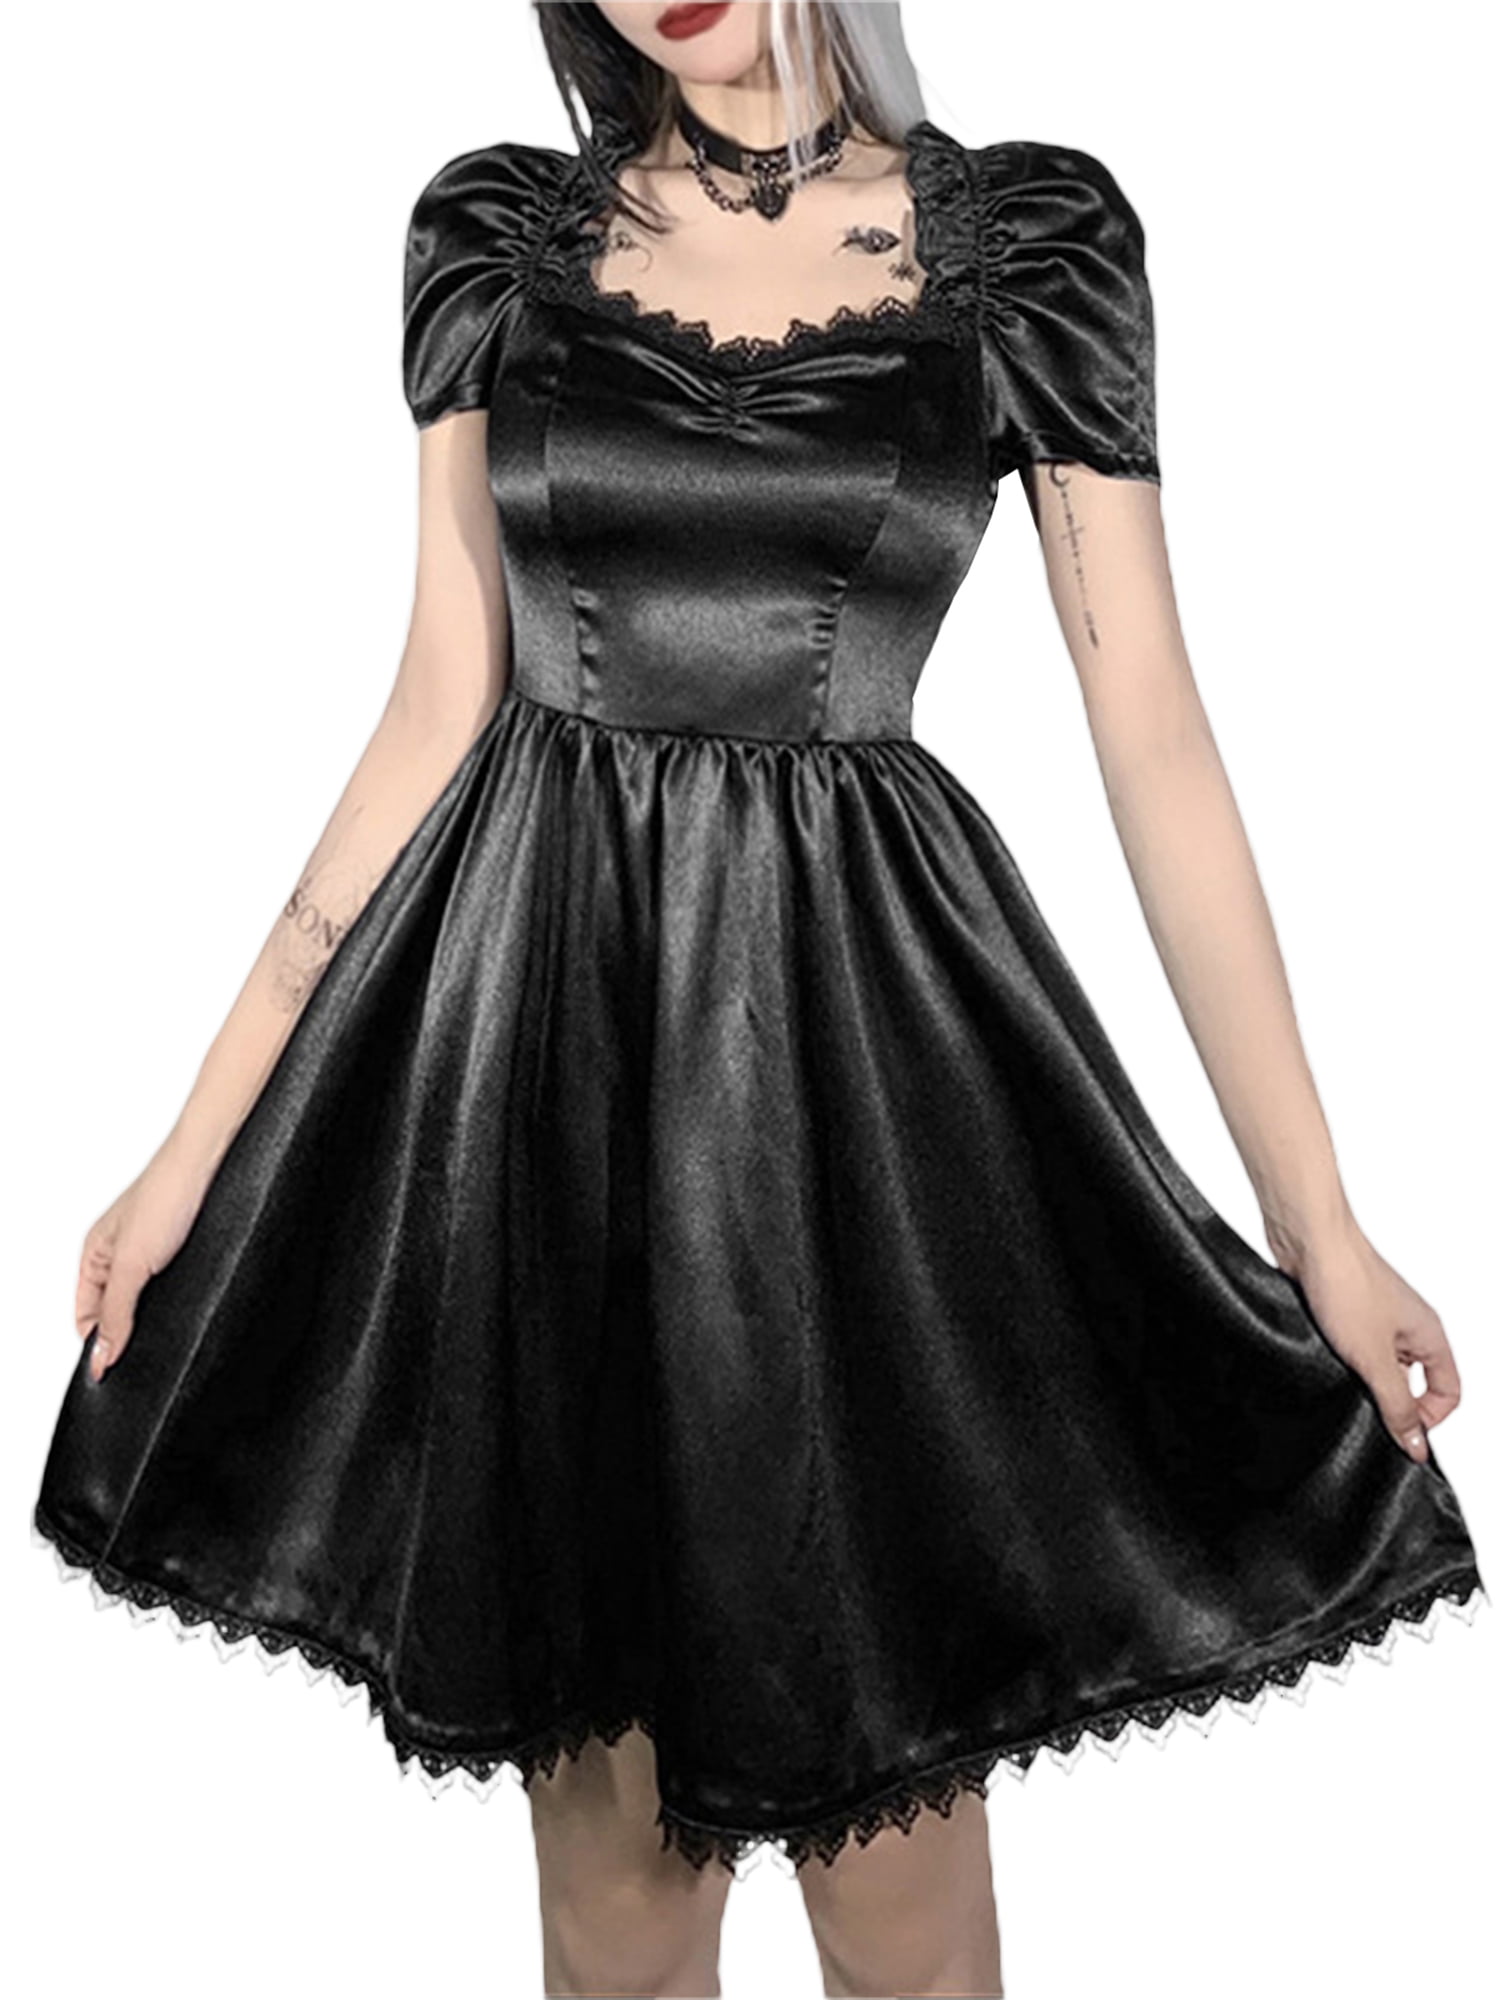 Black Gothic Lace Suede V-Neck Lace Up Cross Pendant Club Party Prom Cami Dress 